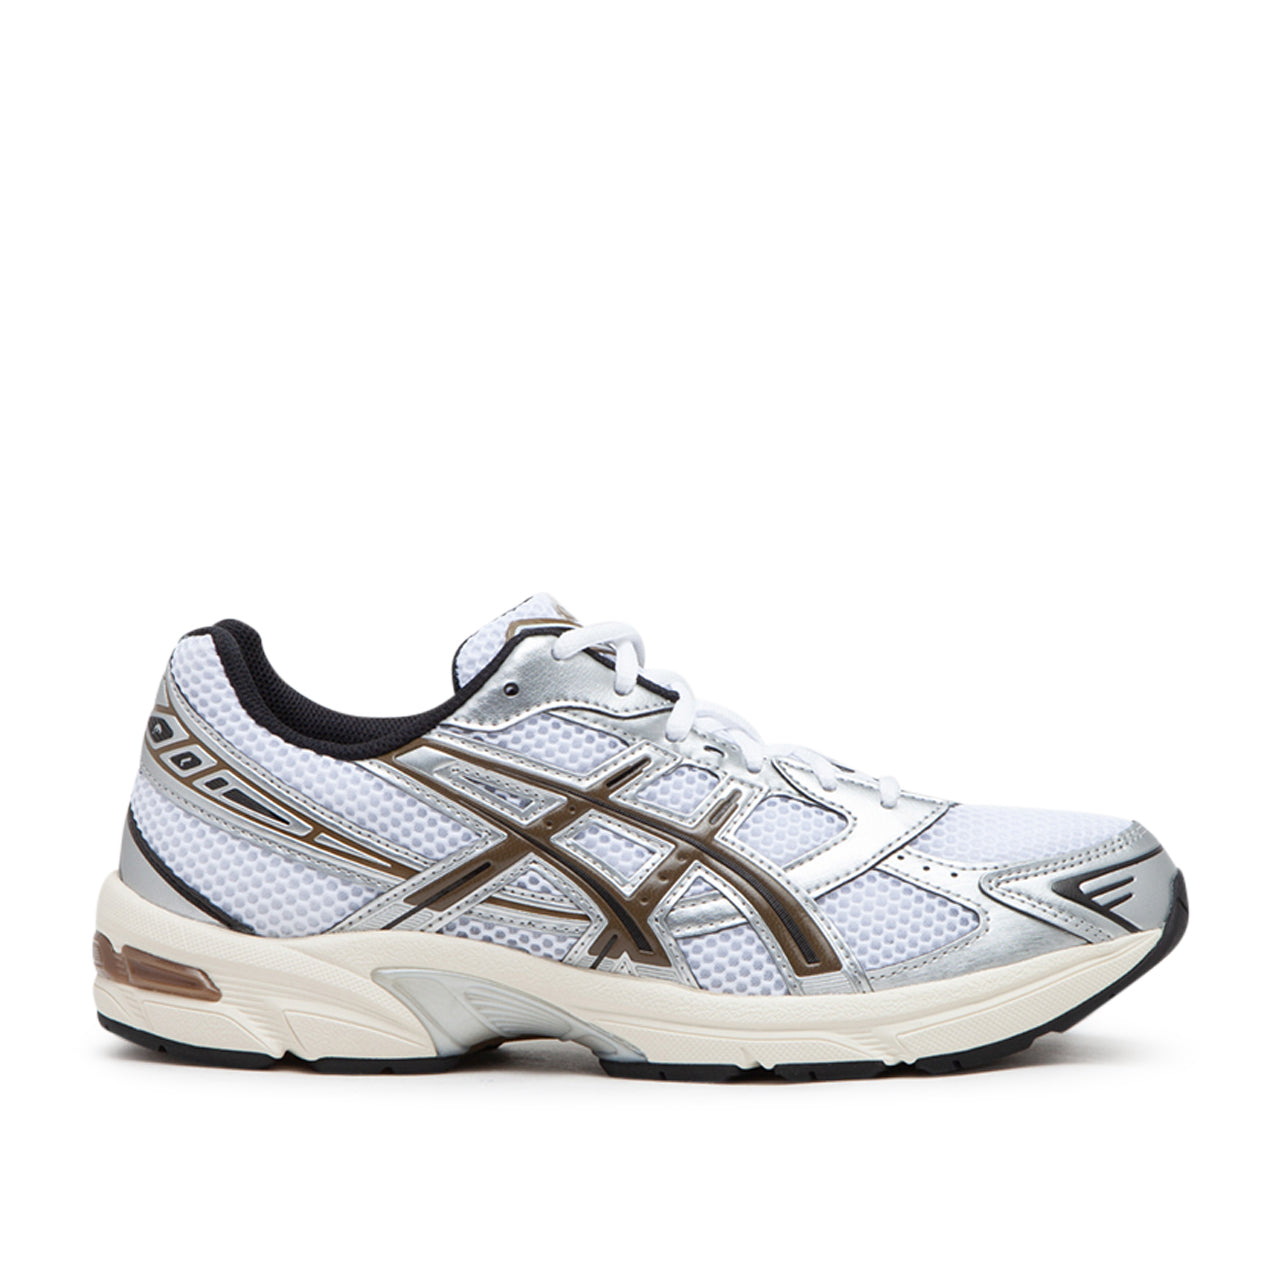 Asics Gel-1130 (White / Silver / Brown) 1201A256-113 - Allike Store